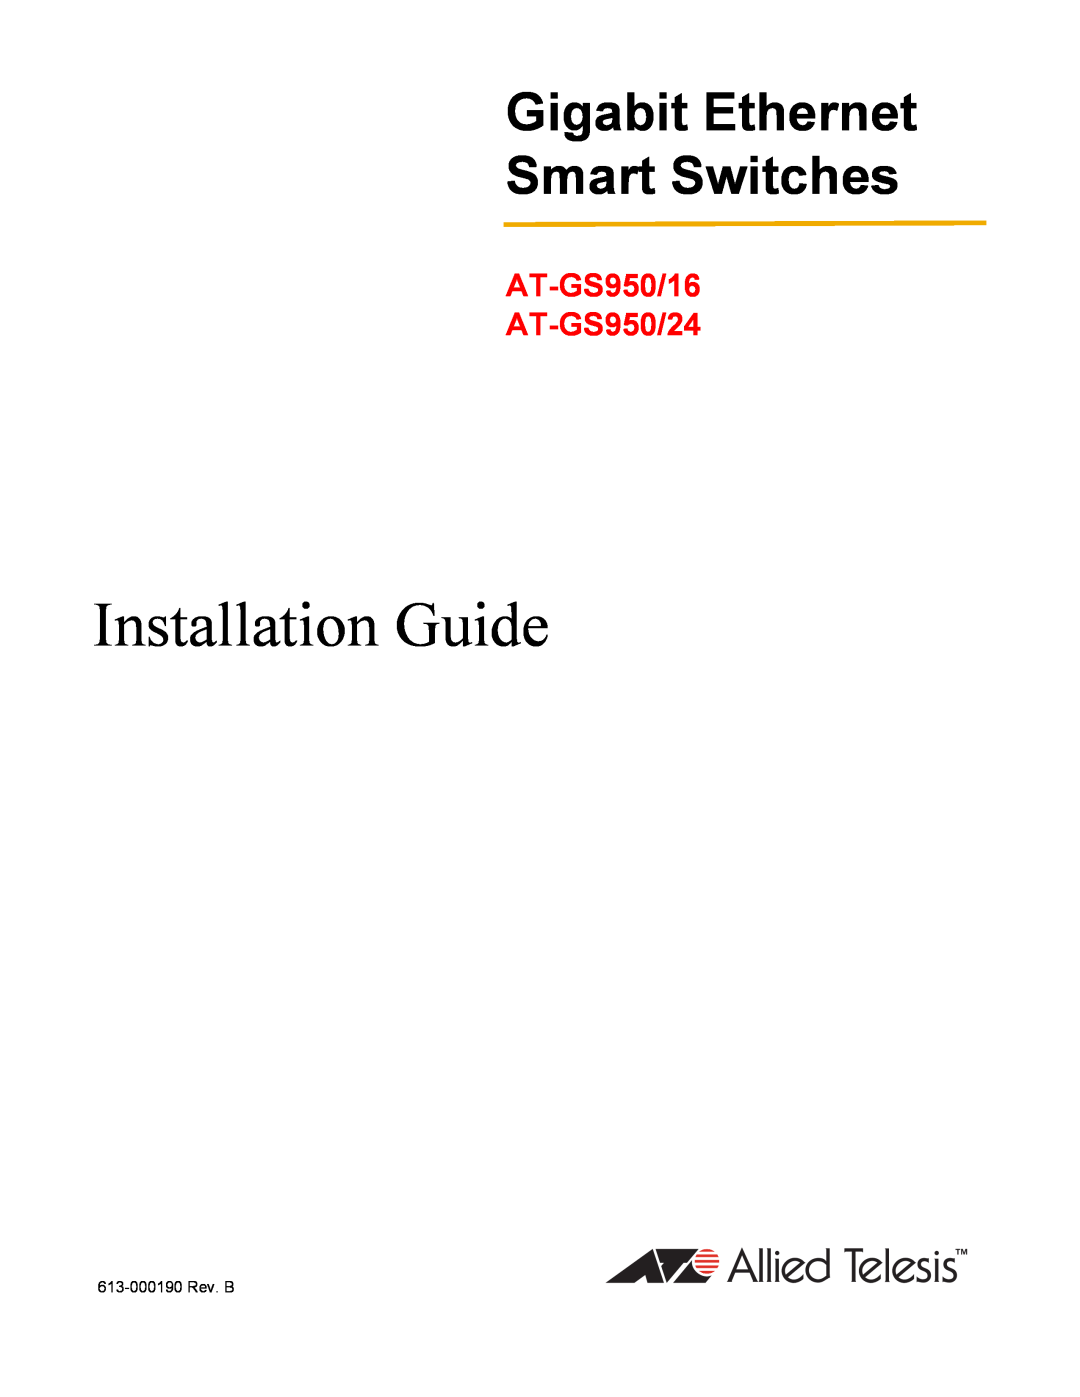 Allied Telesis AT-GS950/16-10 manual Installation Guide, Gigabit Ethernet Smart Switches, AT-GS950/16 AT-GS950/24 